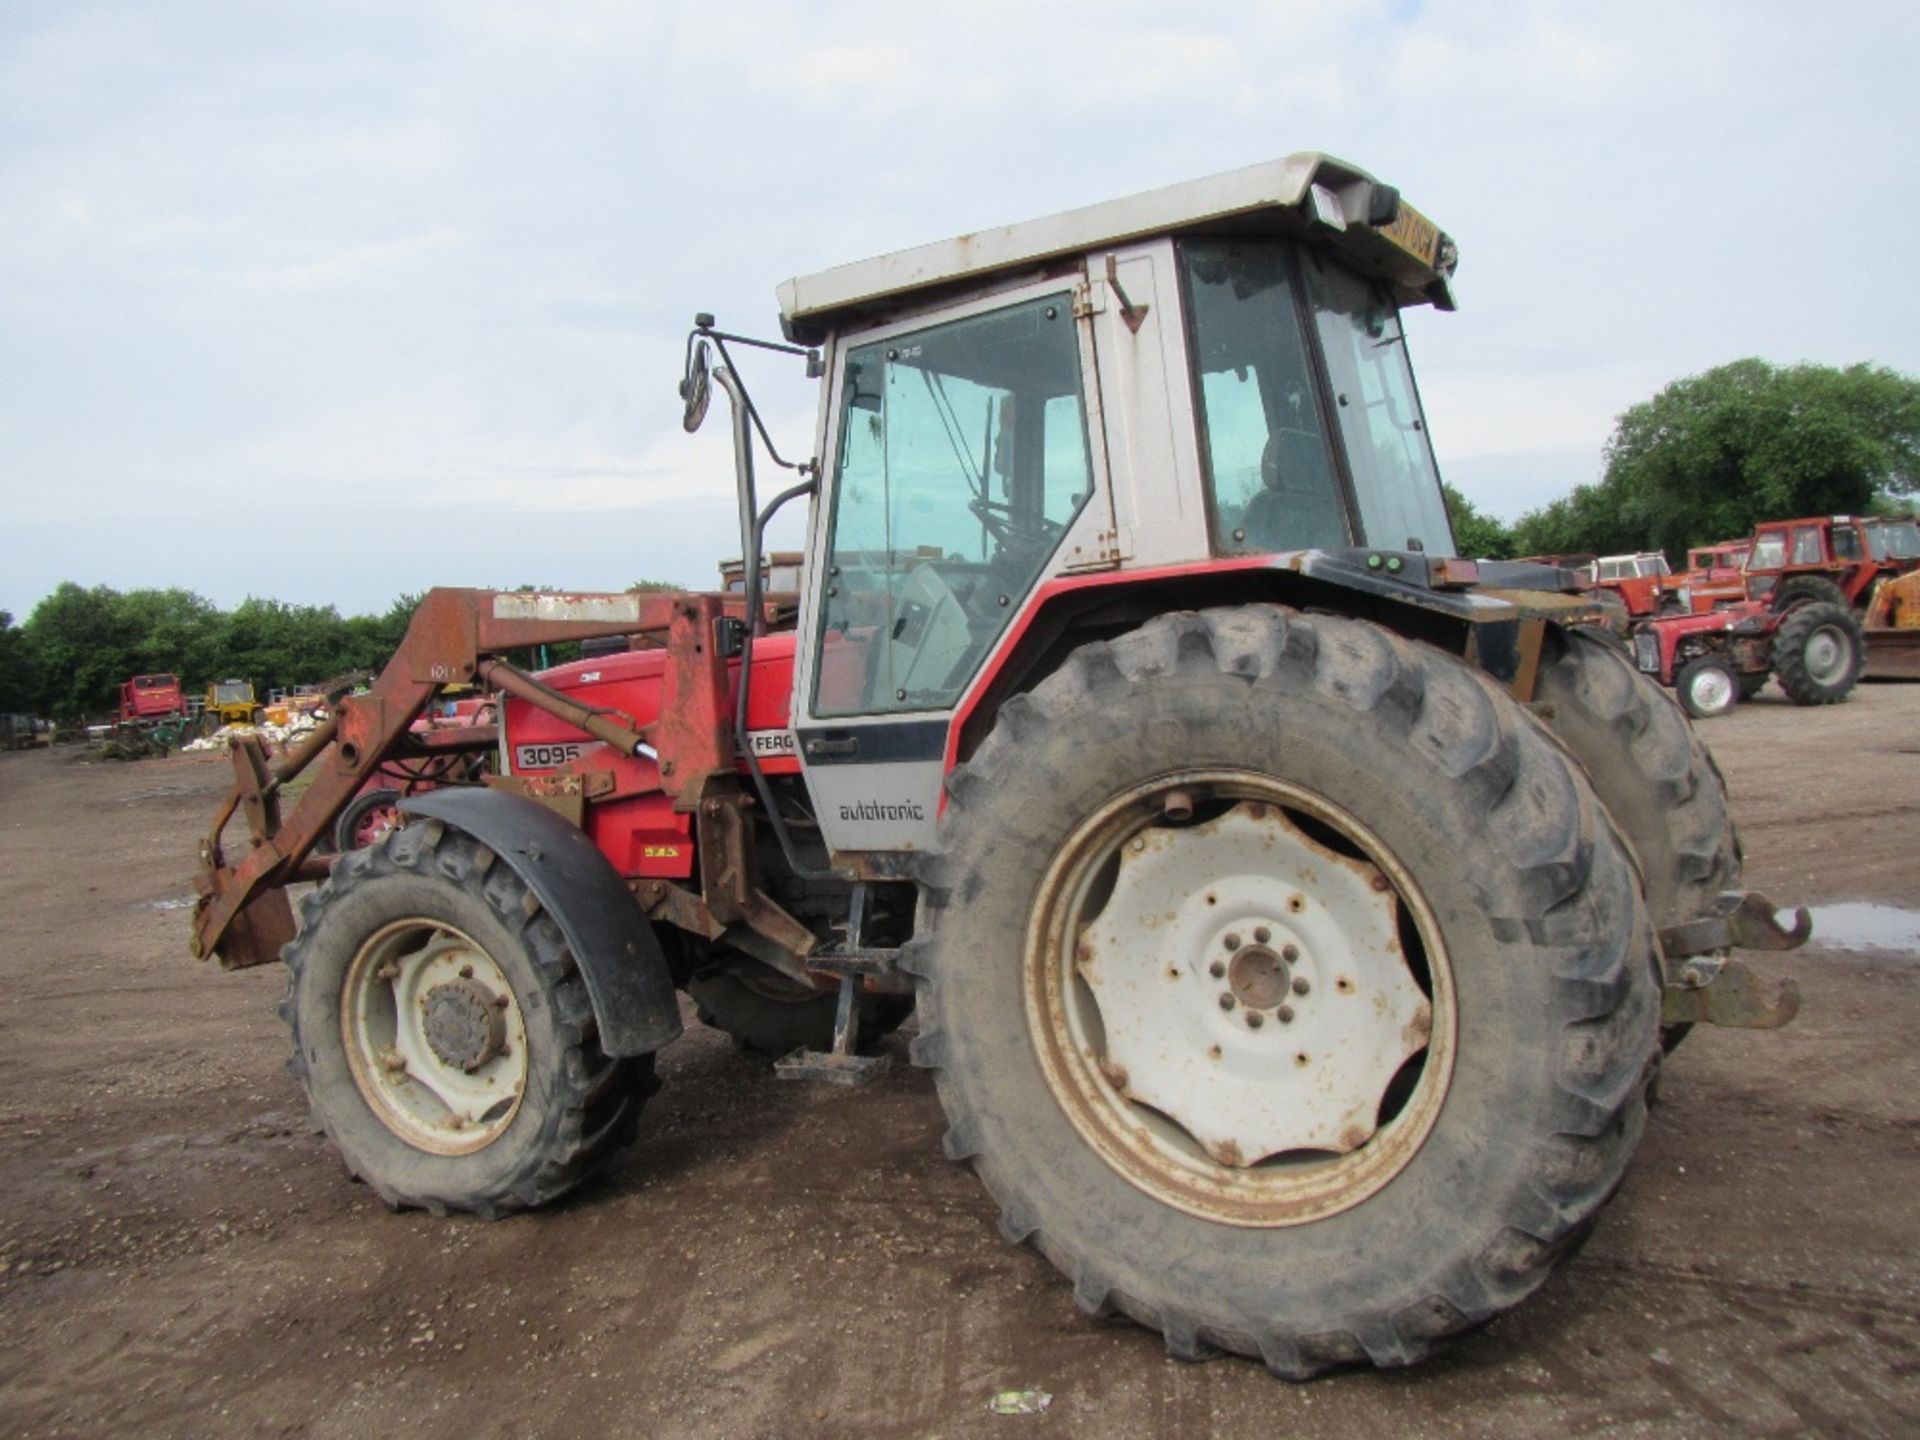 1994 Massey Ferguson 3090 4wd Tractor with Front Loader. Reg. No. M317 OCW Ser. No. C201010 - Image 9 of 17